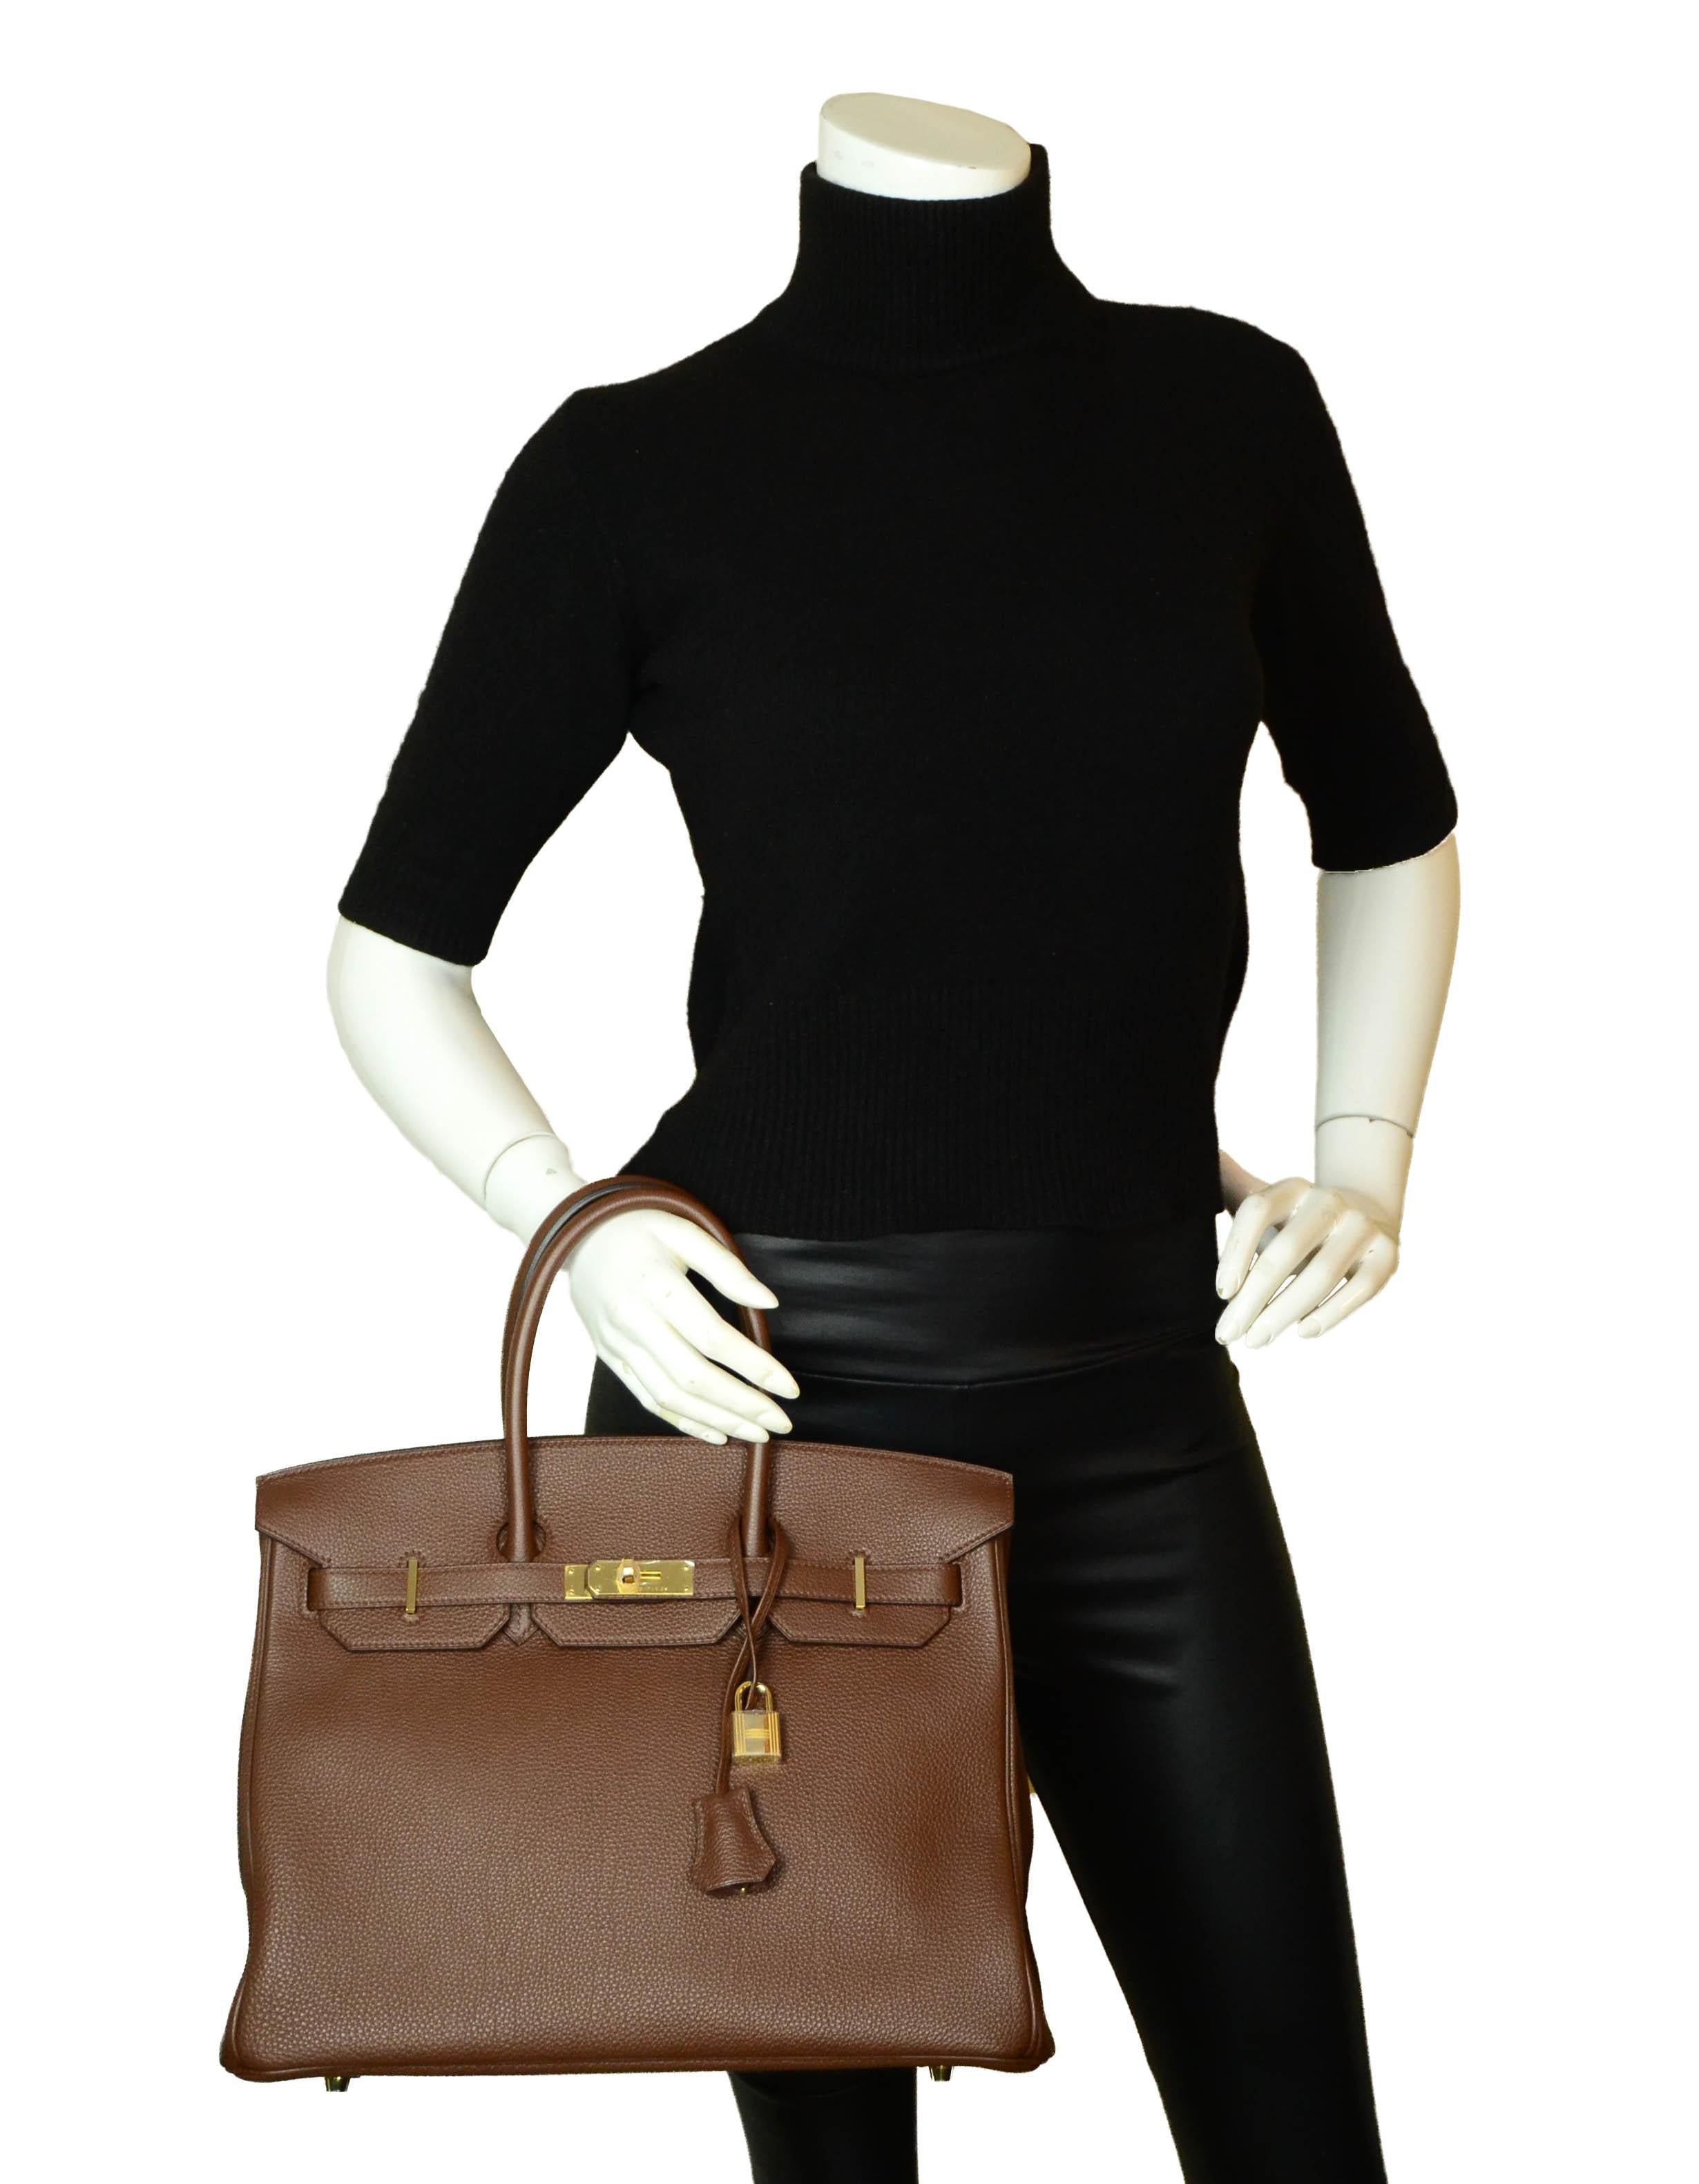 Hermes Brown Togo Leather 35cm Birkin Bag GHW

Made In: France
Year of Production: 2013
Color: Brown
Hardware: Gold
Materials: Togo
Lining: Chevre leather
Closure/Opening: Double arm strap with twist lock
Interior Pockets: One zip and one